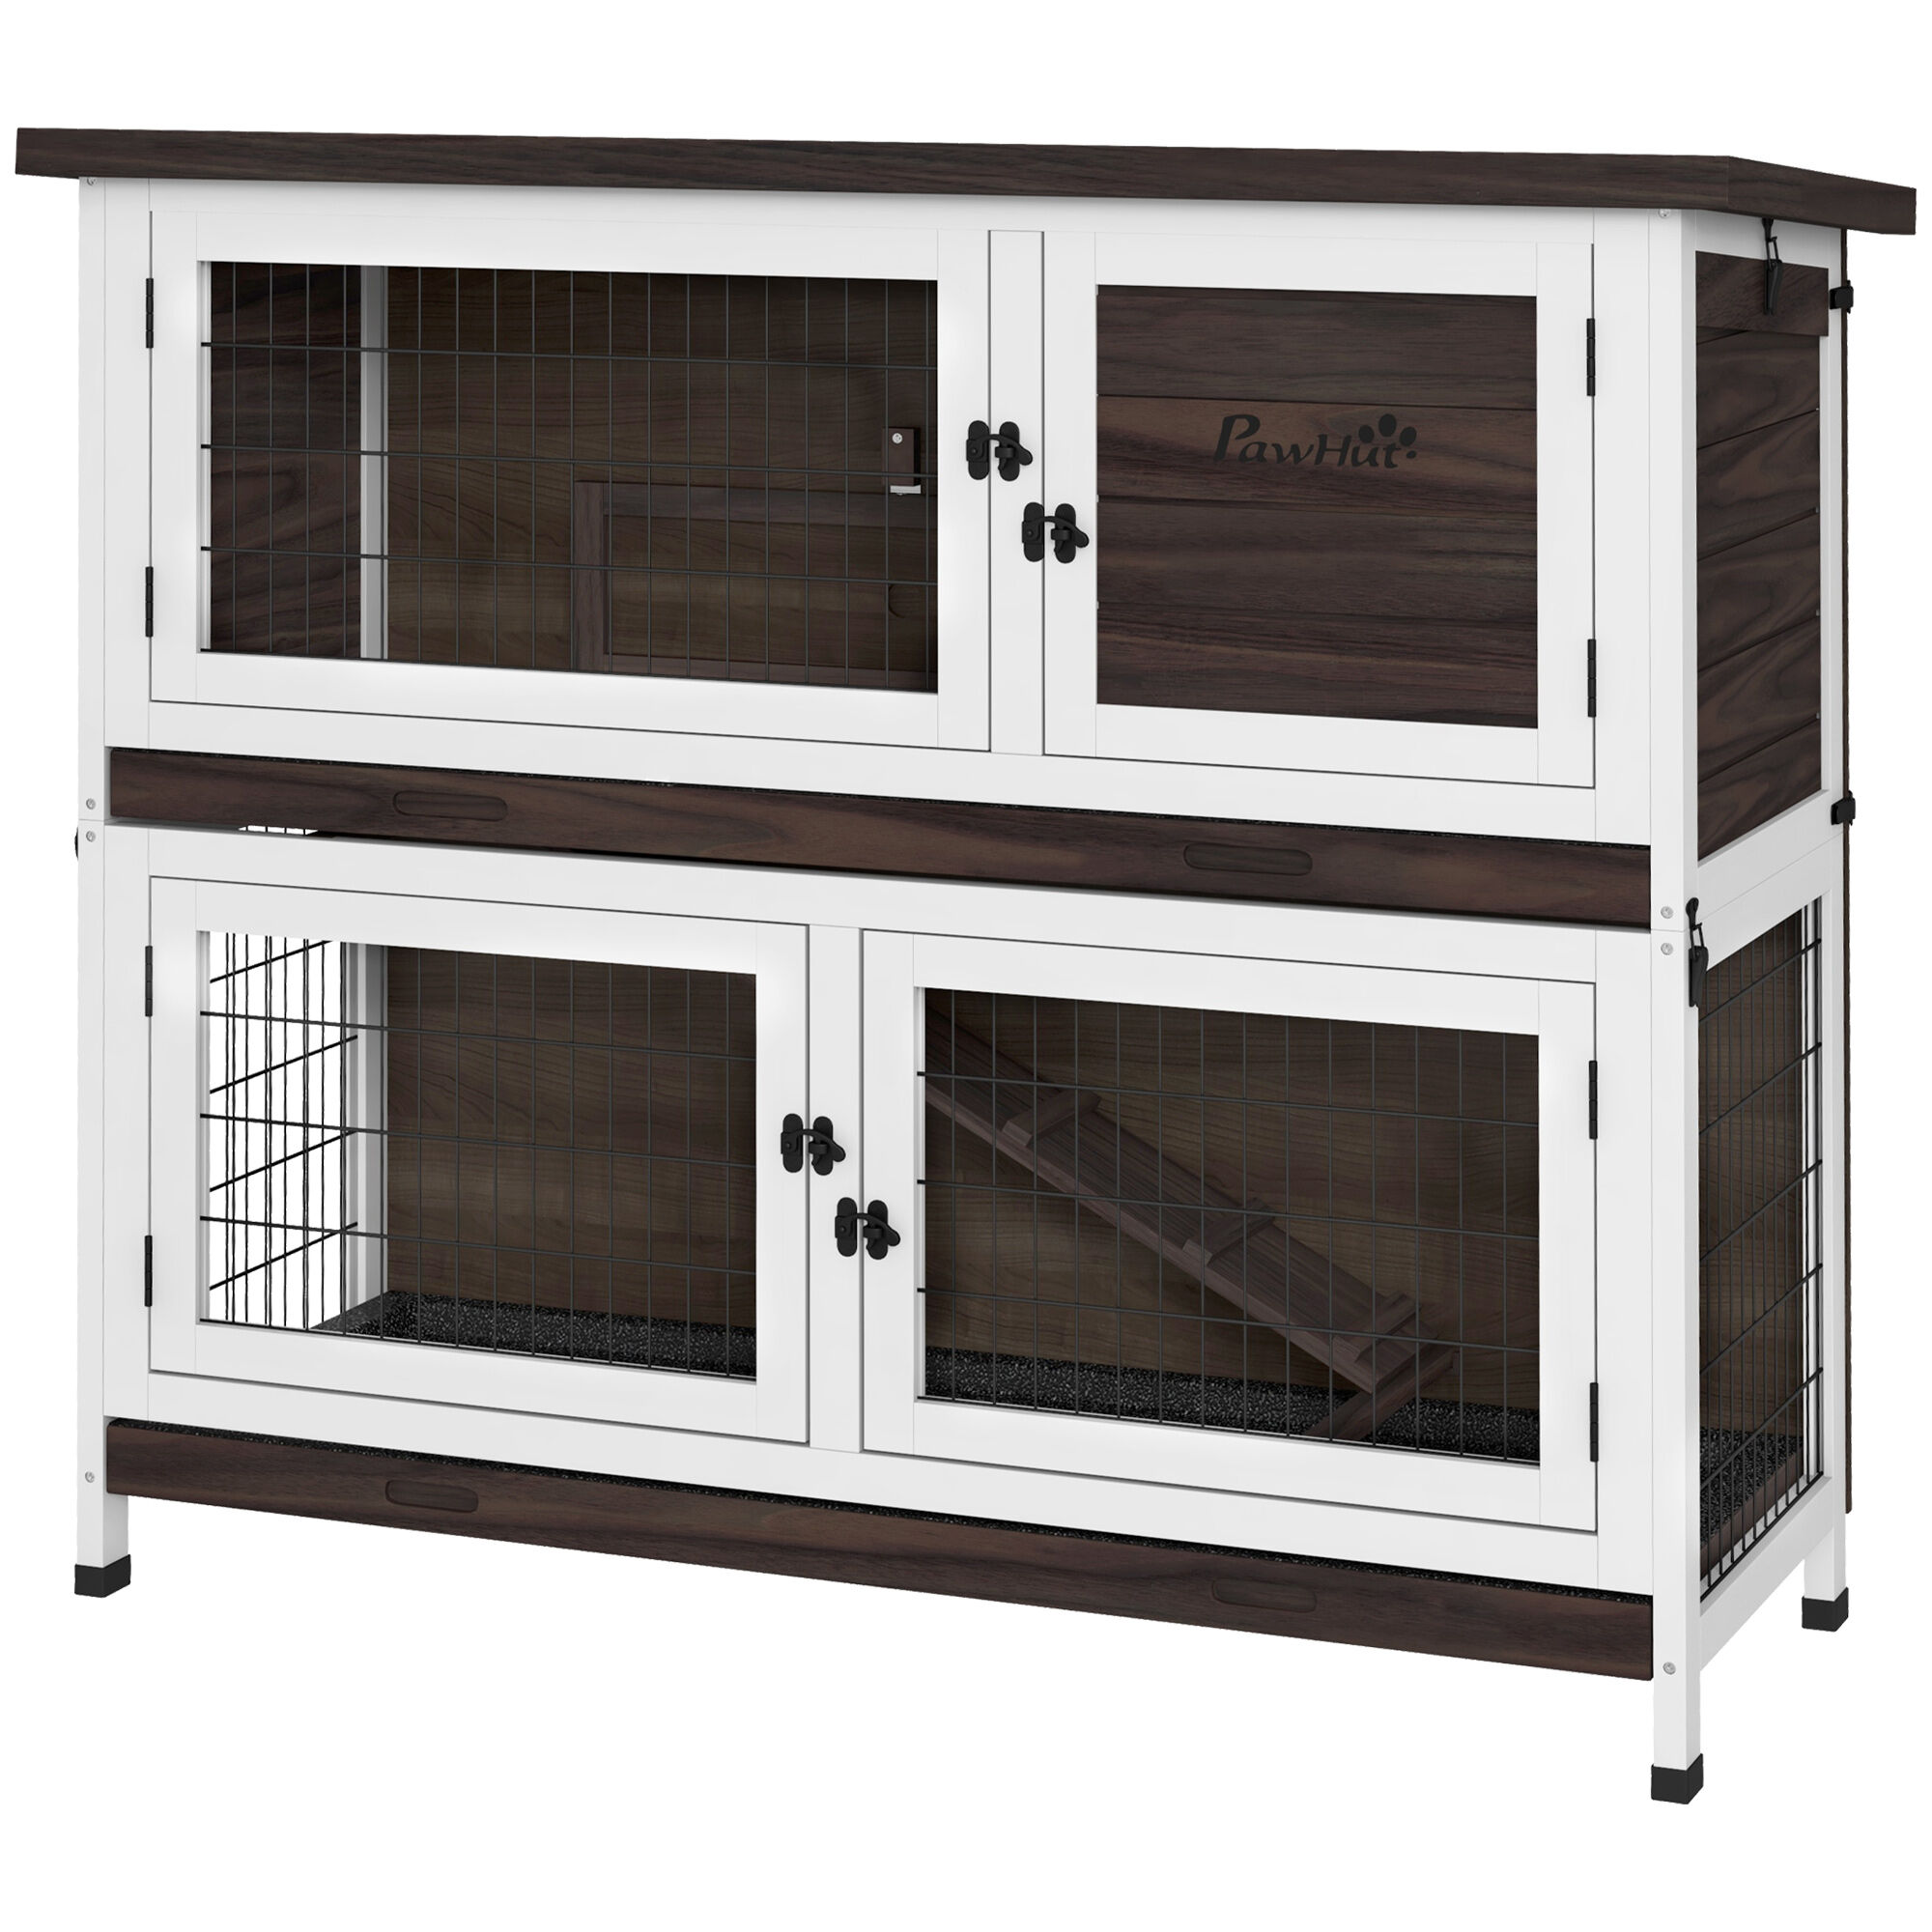 PawHut 46" Outdoor Rabbit Hutch, Bunny Cage Pet House w/ Removable Trays & Ramp for 1-2 Rabbits, Small Animal Habitat, Brown